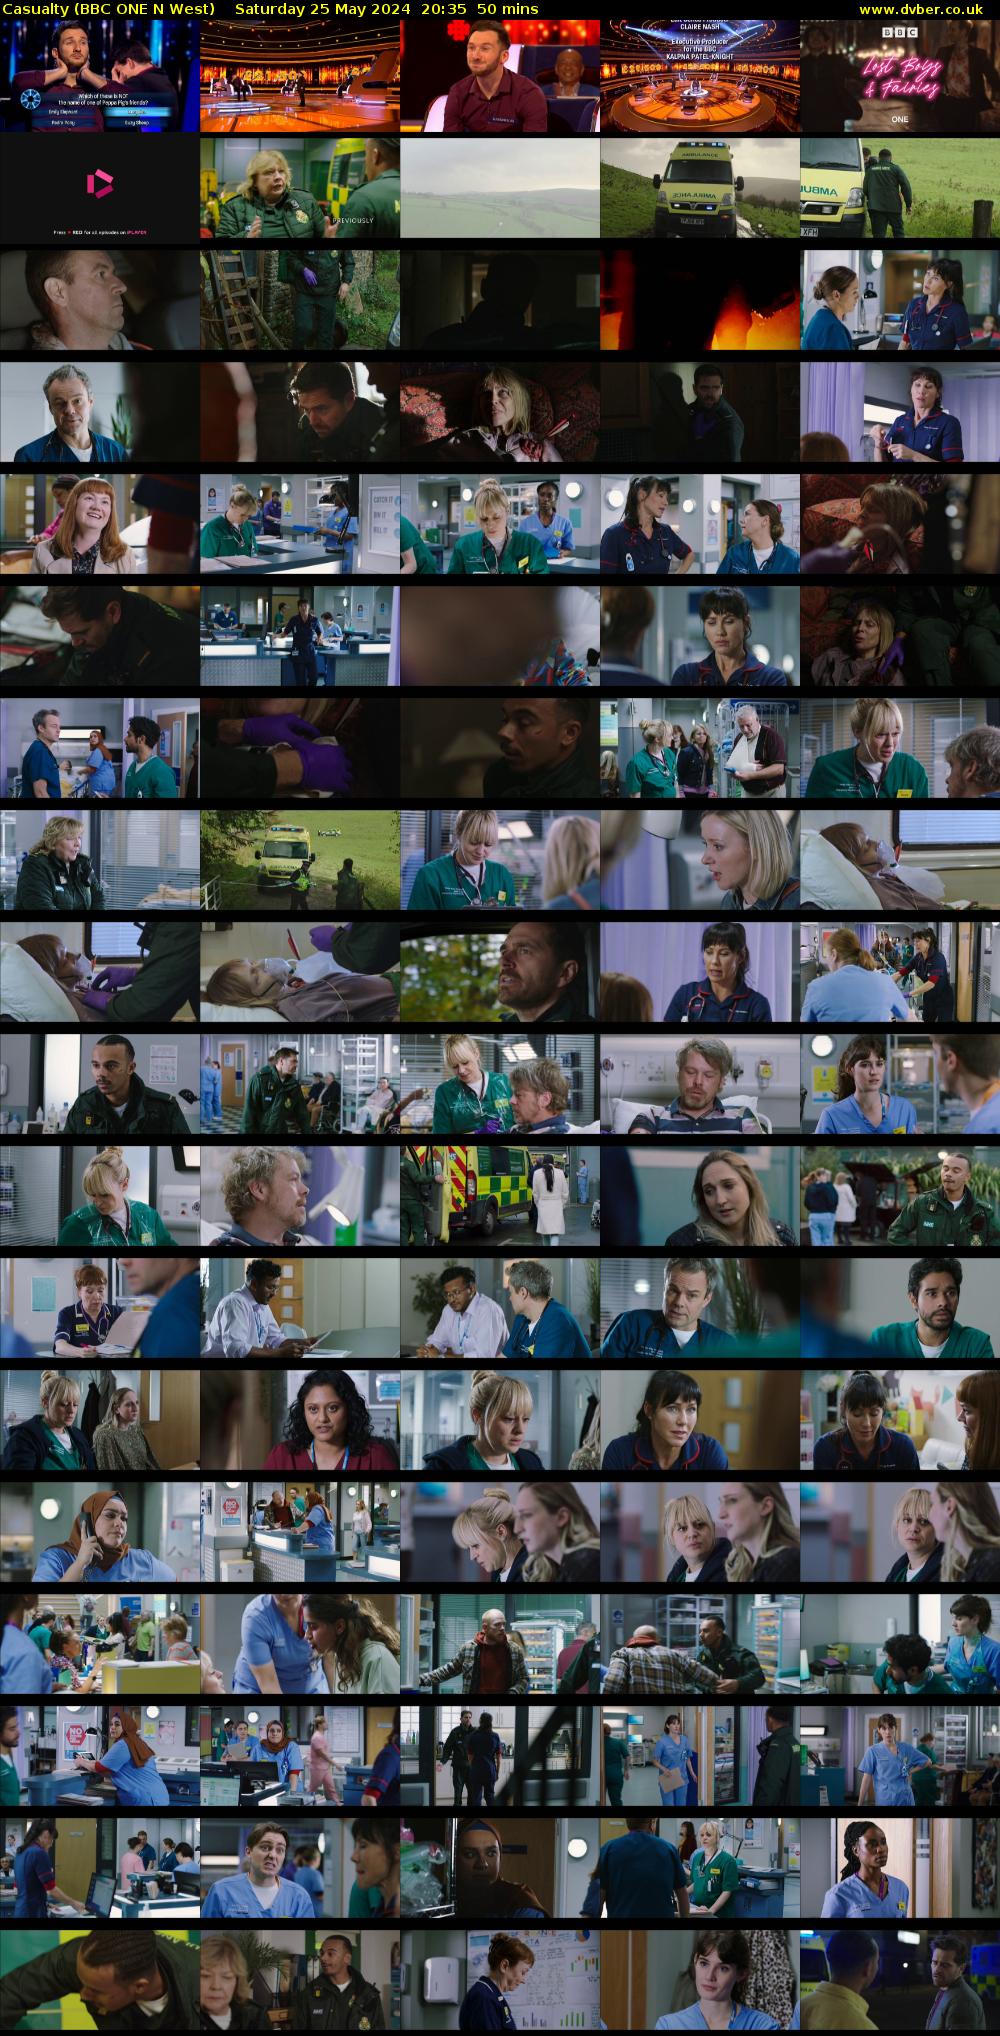 Casualty (BBC ONE N West) Saturday 25 May 2024 20:35 - 21:25